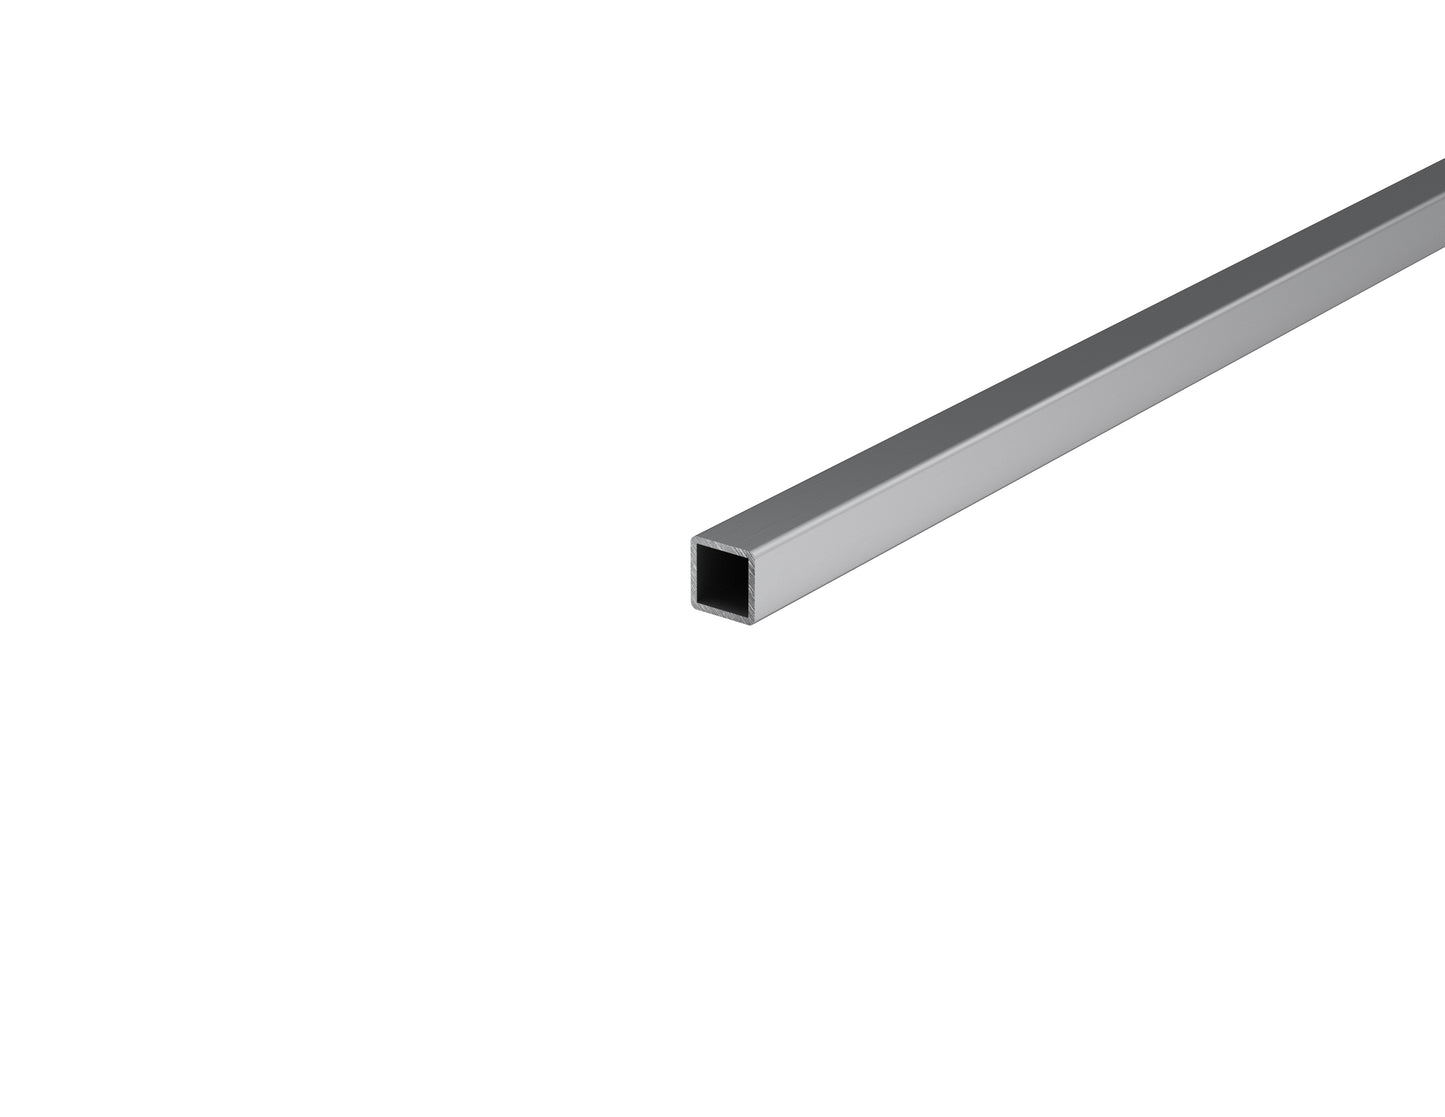 Buy 5/8" Square Aluminum tubing, 0.625" Square aluminum long lengths and sticks or cut to size